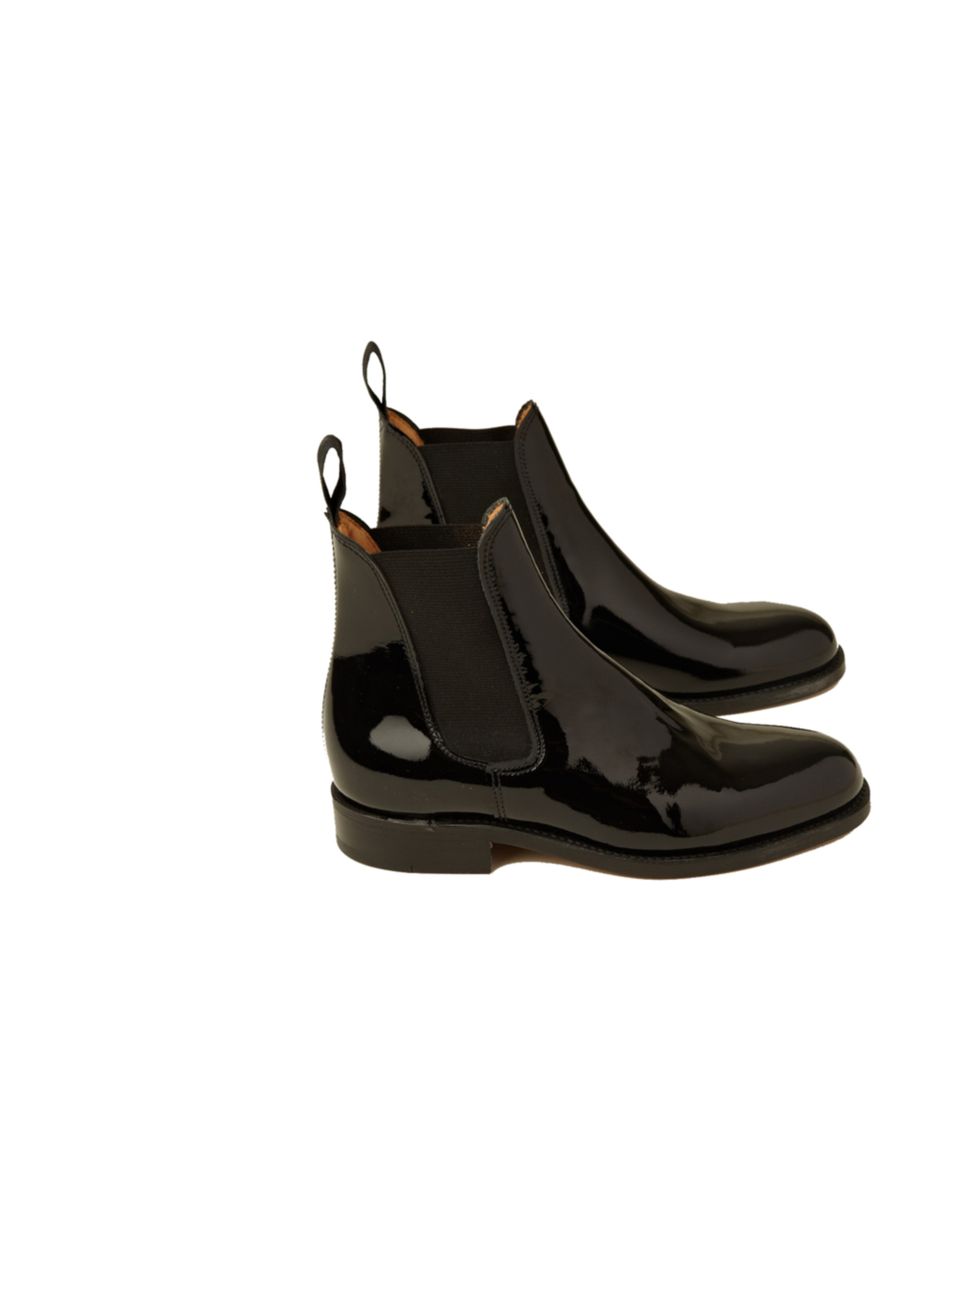 <p>Keeping warm, dry and stylish is no easy feat right now, but YMC's new patent boots will do just the trick... <a href="http://www.youmustcreate.com/products/shoes-womens/ladies-pantent-chelsea-boot/">YMC x Mark McNairy</a> Chelsea ankle boots, £239</p>